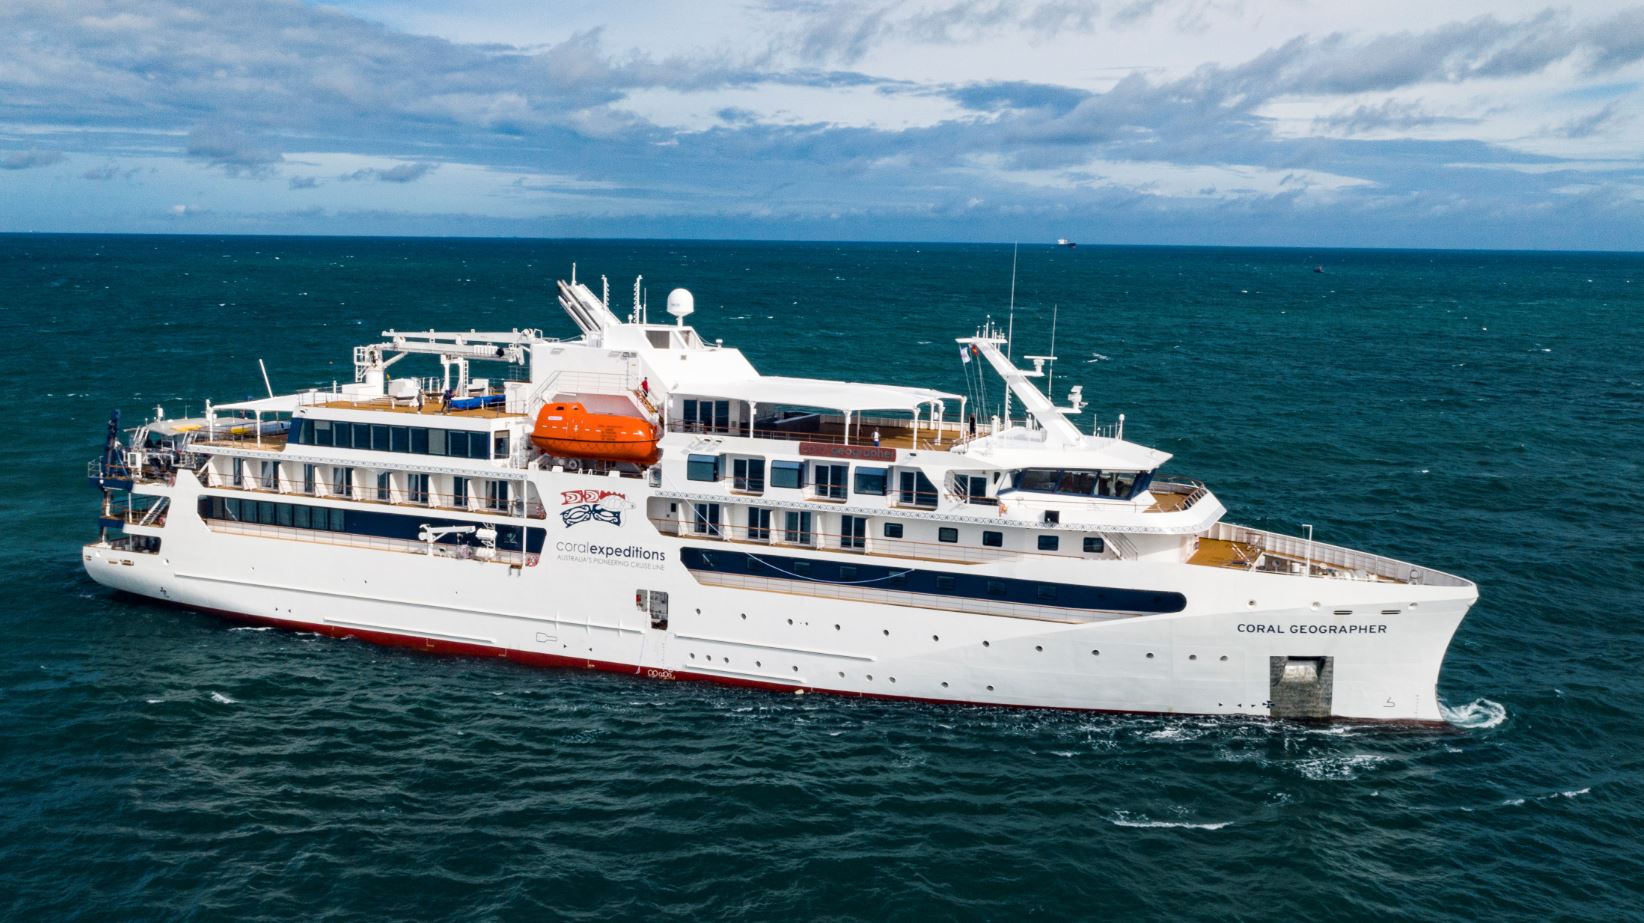 VARD delivers expedition ship Coral Geographer CRUISE TO TRAVEL